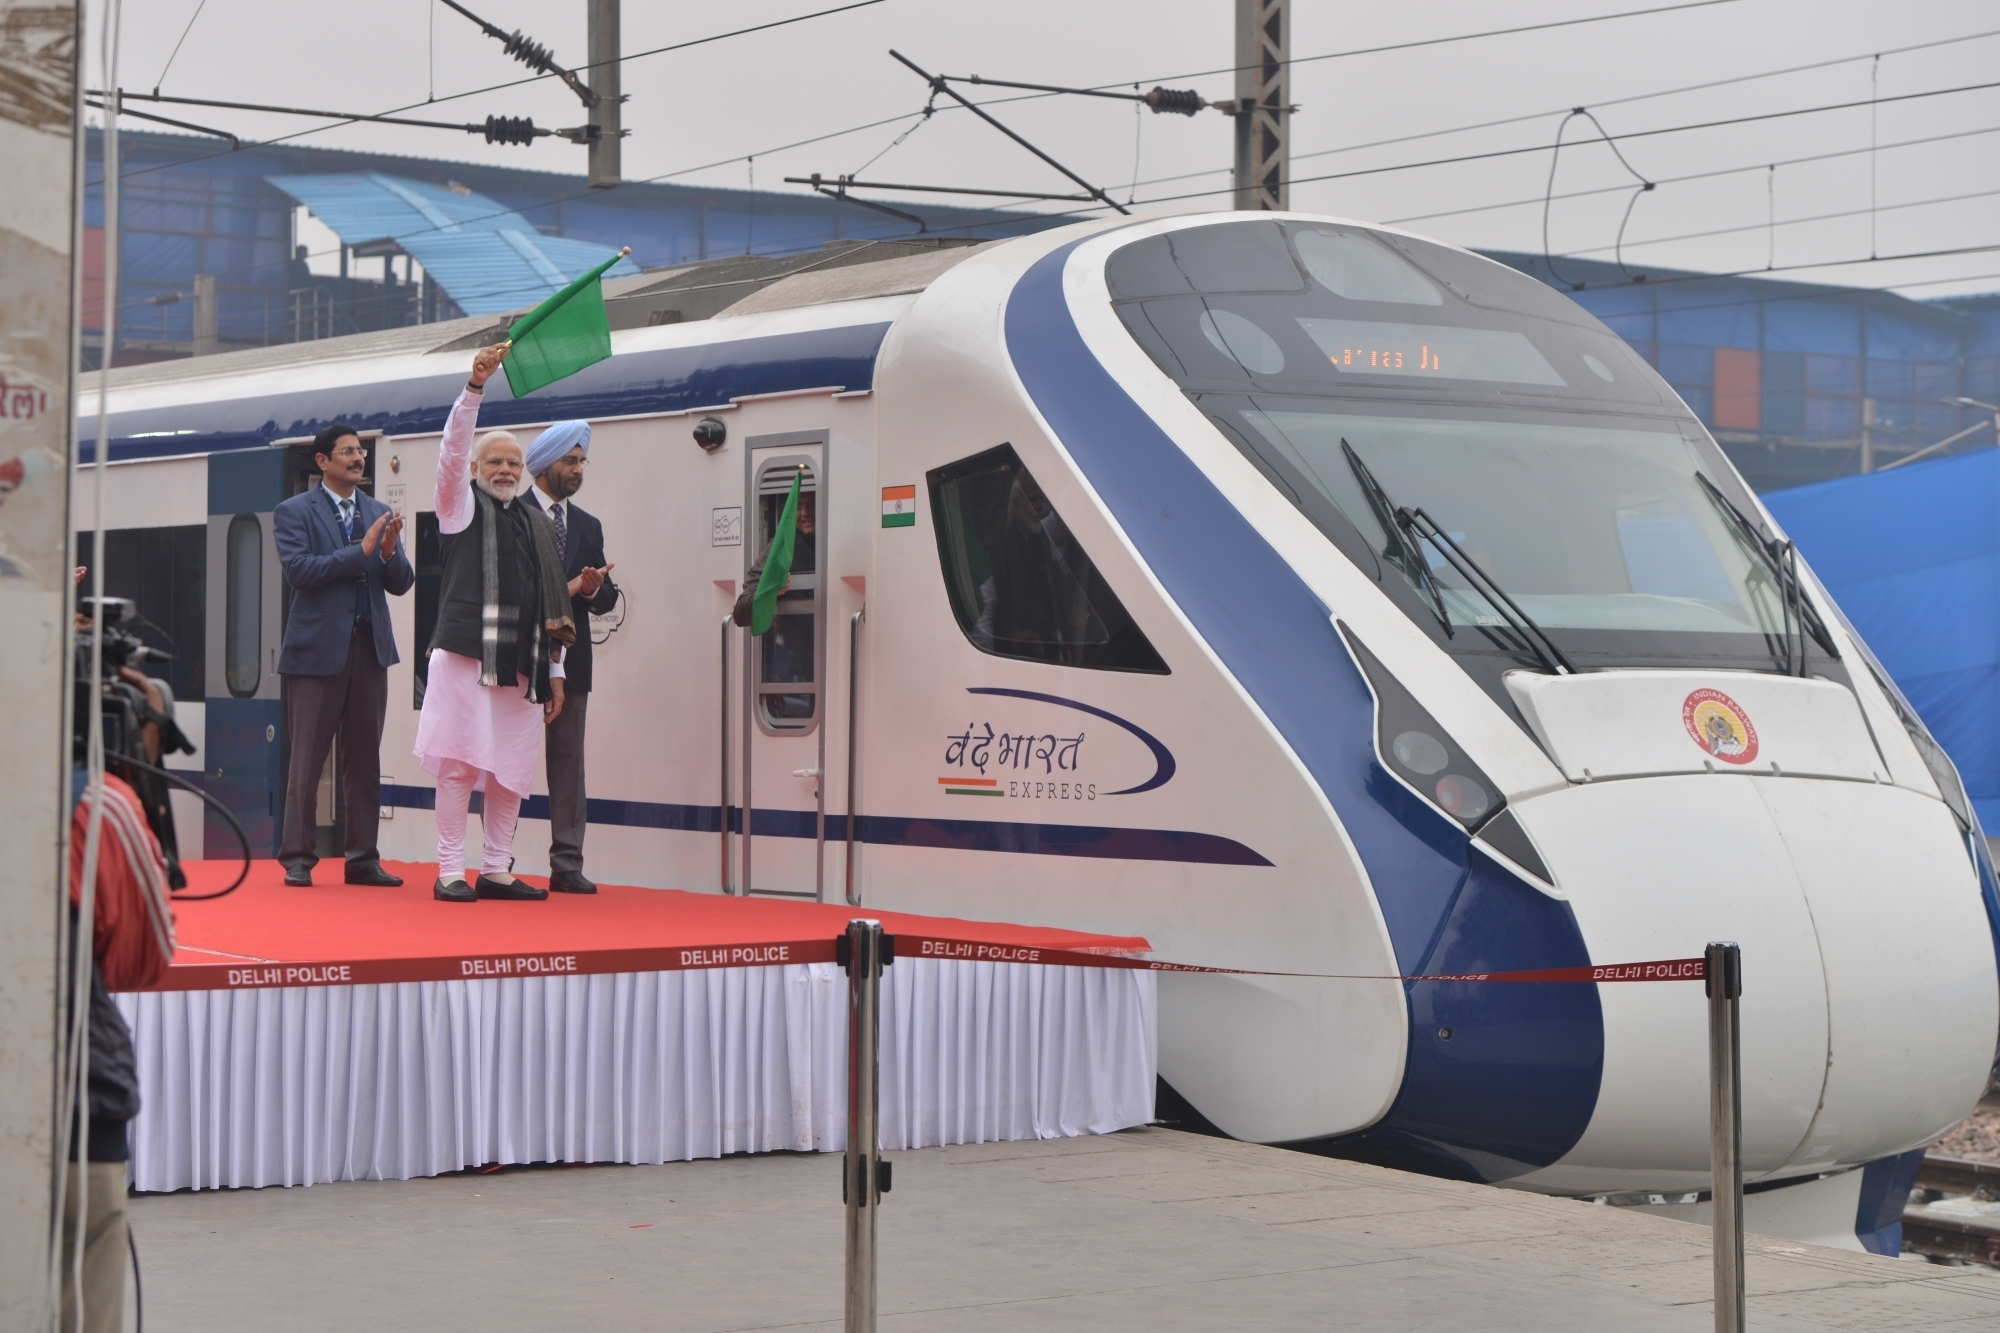 Vande Bharat express, India's fastest train set for commercial run from Sunday